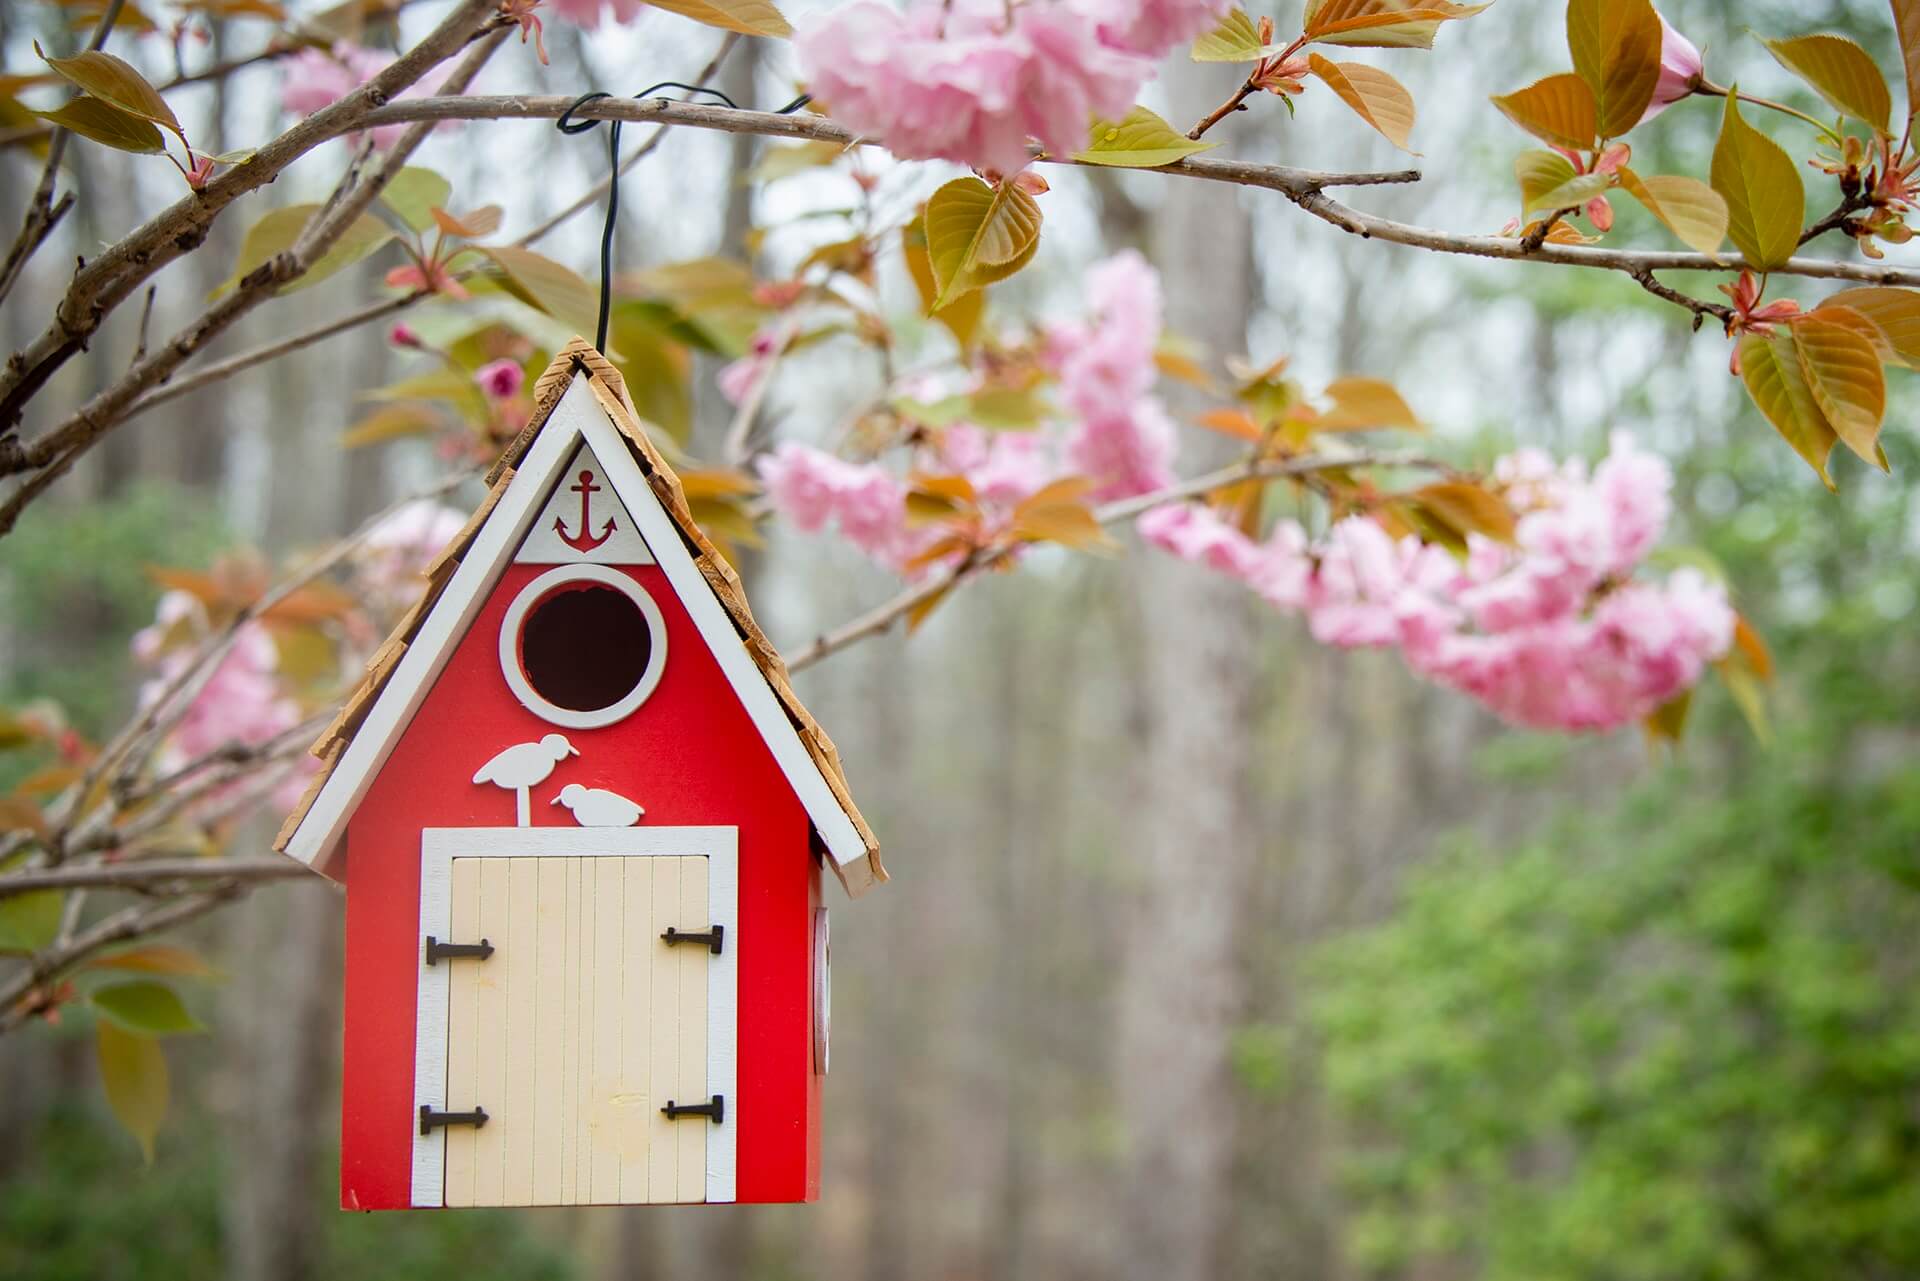 DIY Hummingbird House: Create A Charming Home For Your Feathered Friends